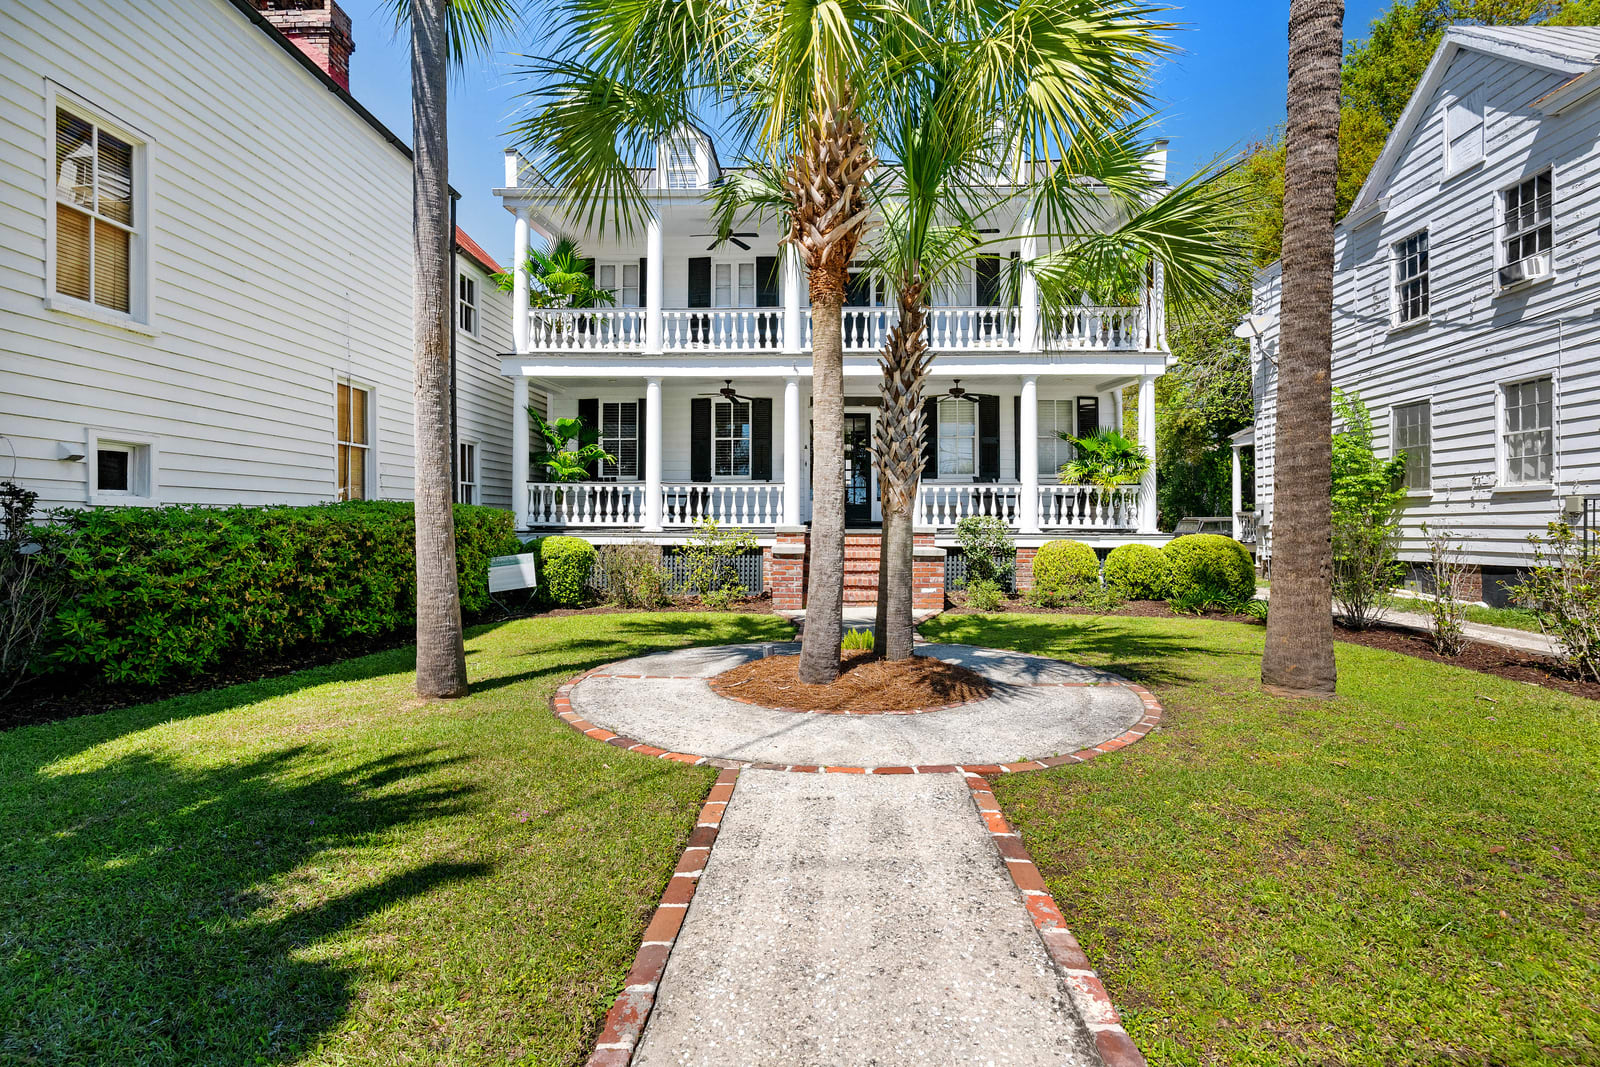 Exterior of your beautiful Downtown Charleston home!